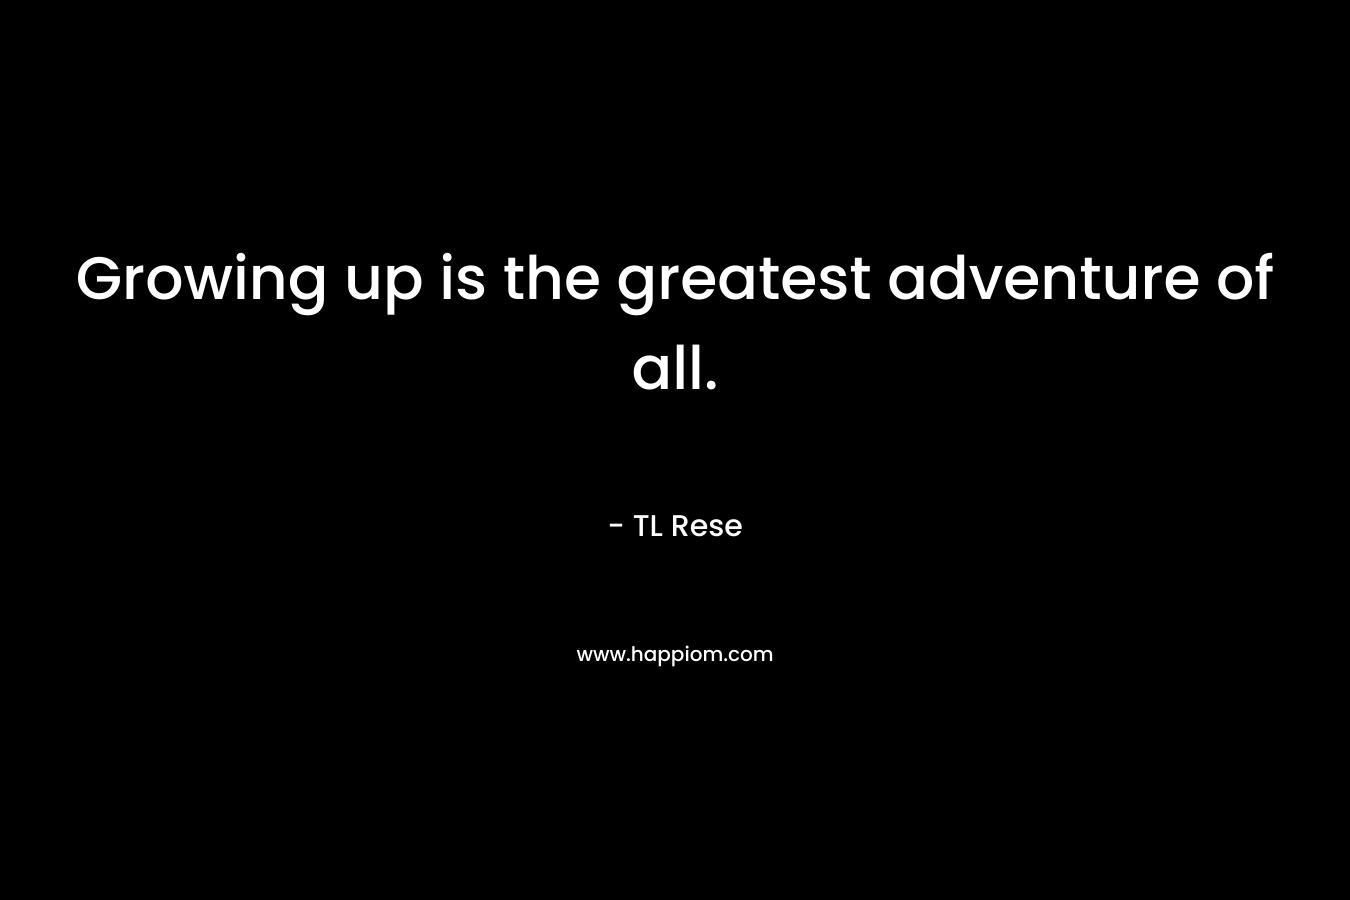 Growing up is the greatest adventure of all. – TL Rese